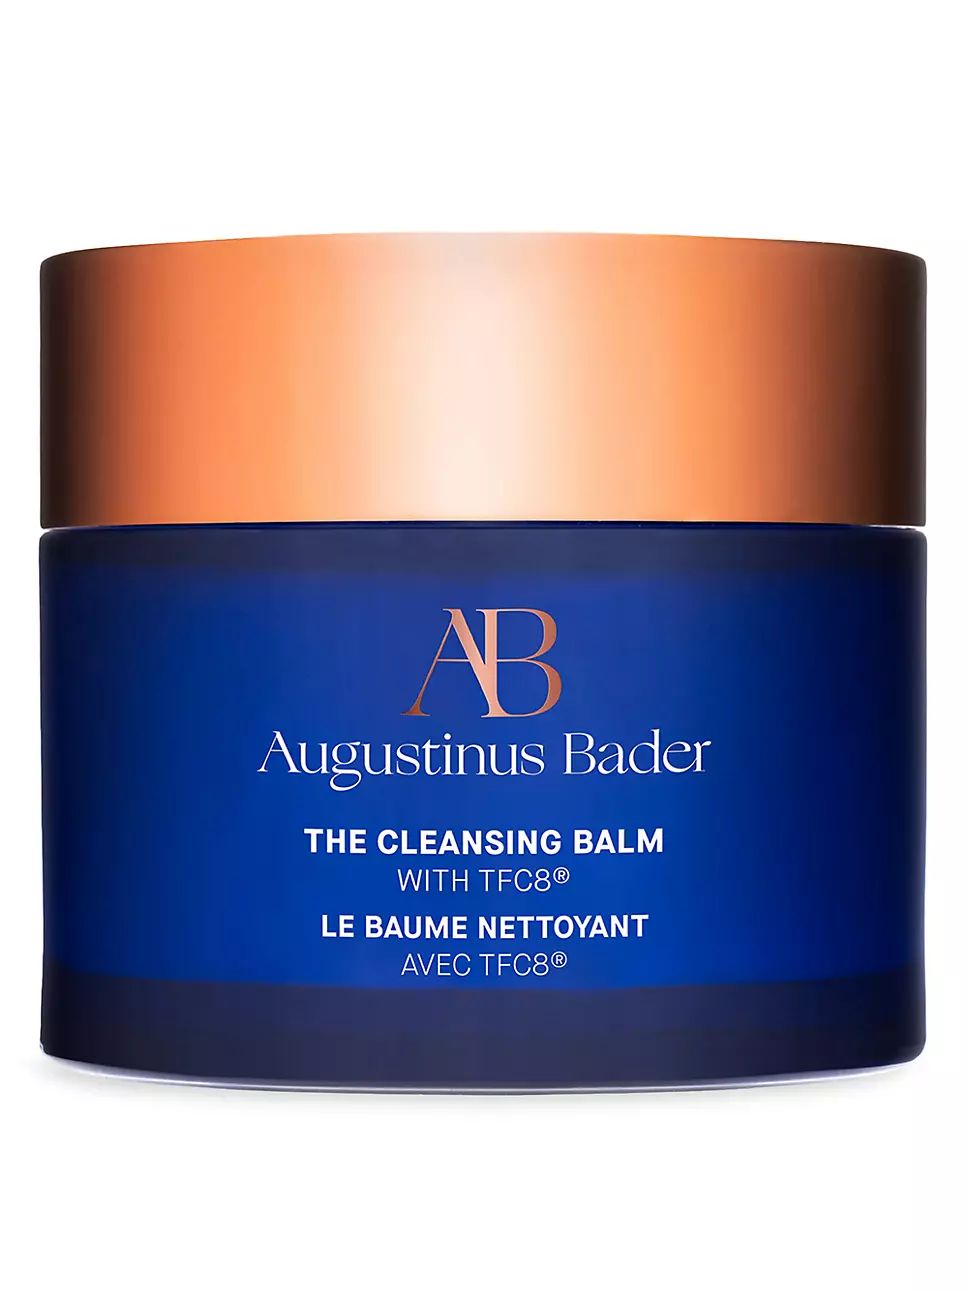 Augustinus Bader The Cleansing Balm | Saks Fifth Avenue